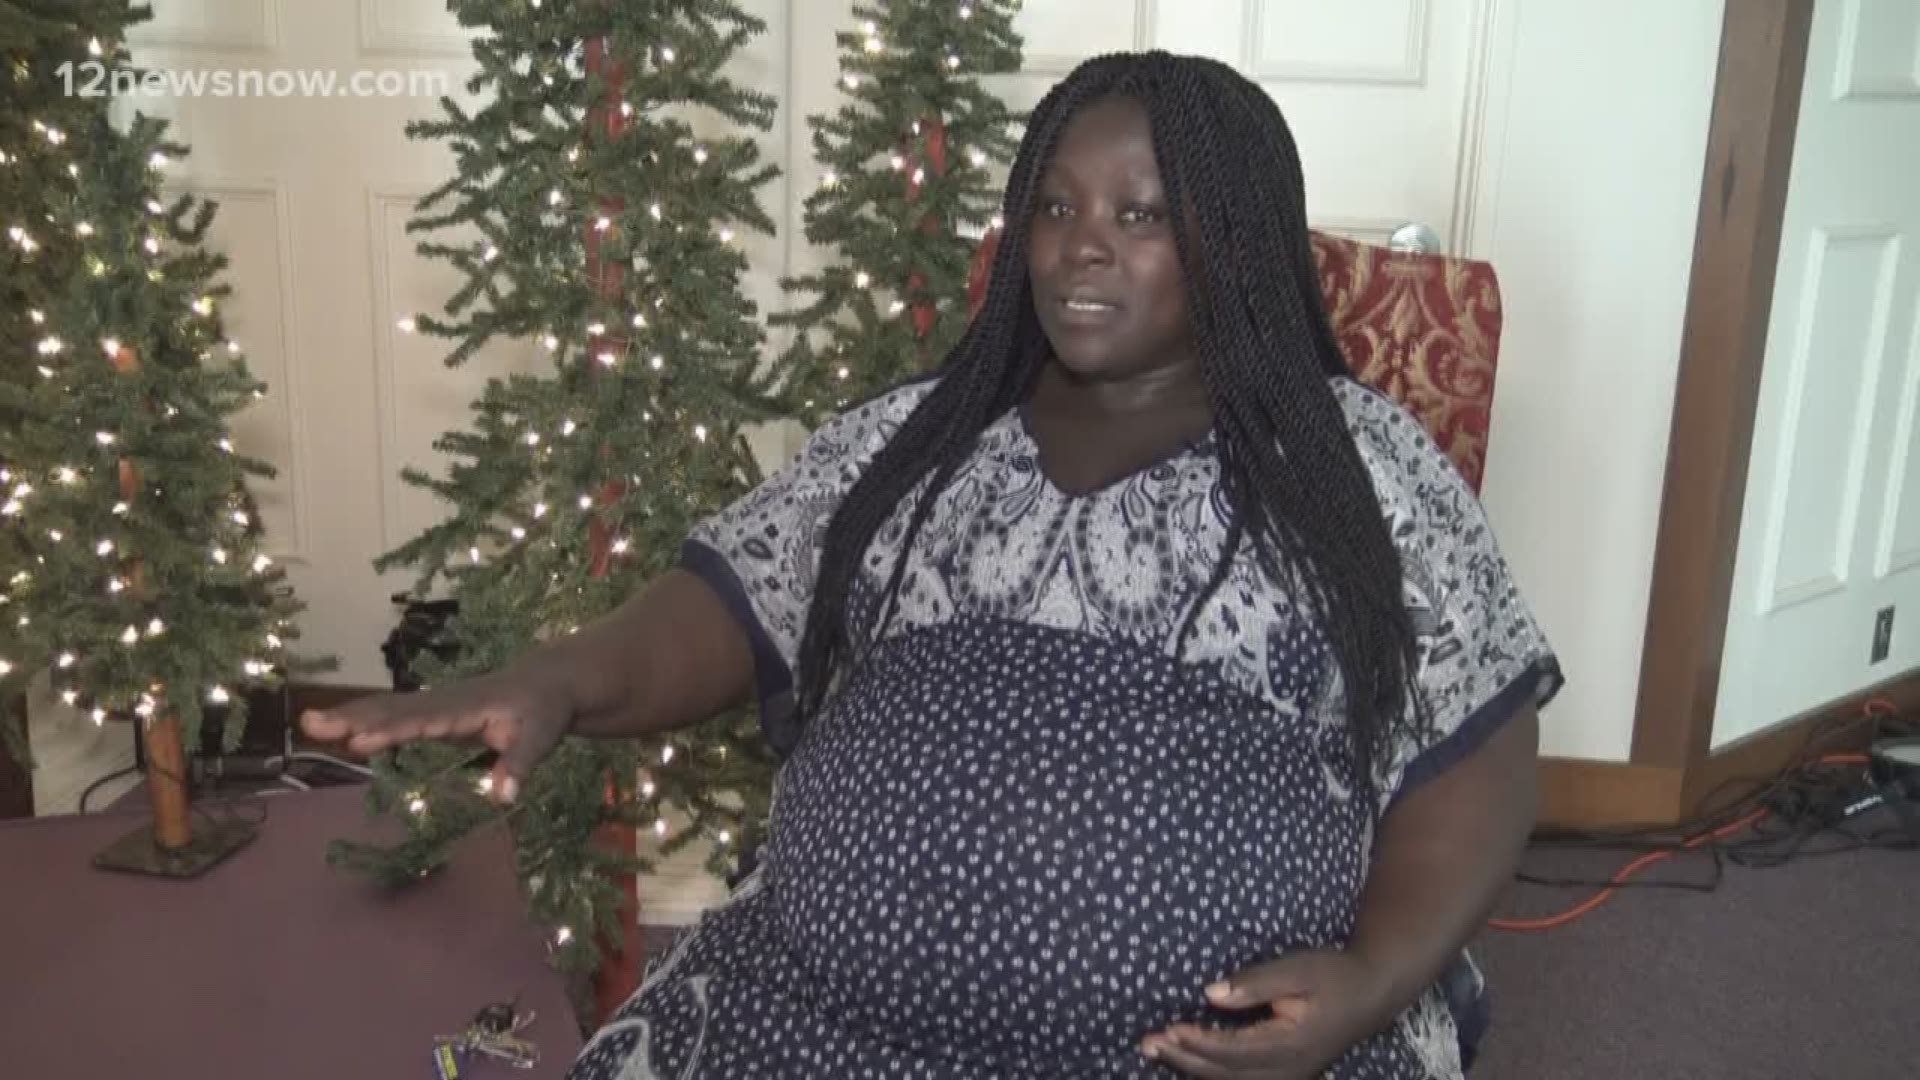 Ruth Mochire is 43-years-old and a mother of five. She had no idea she was pregnant and did not find out until she had a medical test done so she could go back to work.